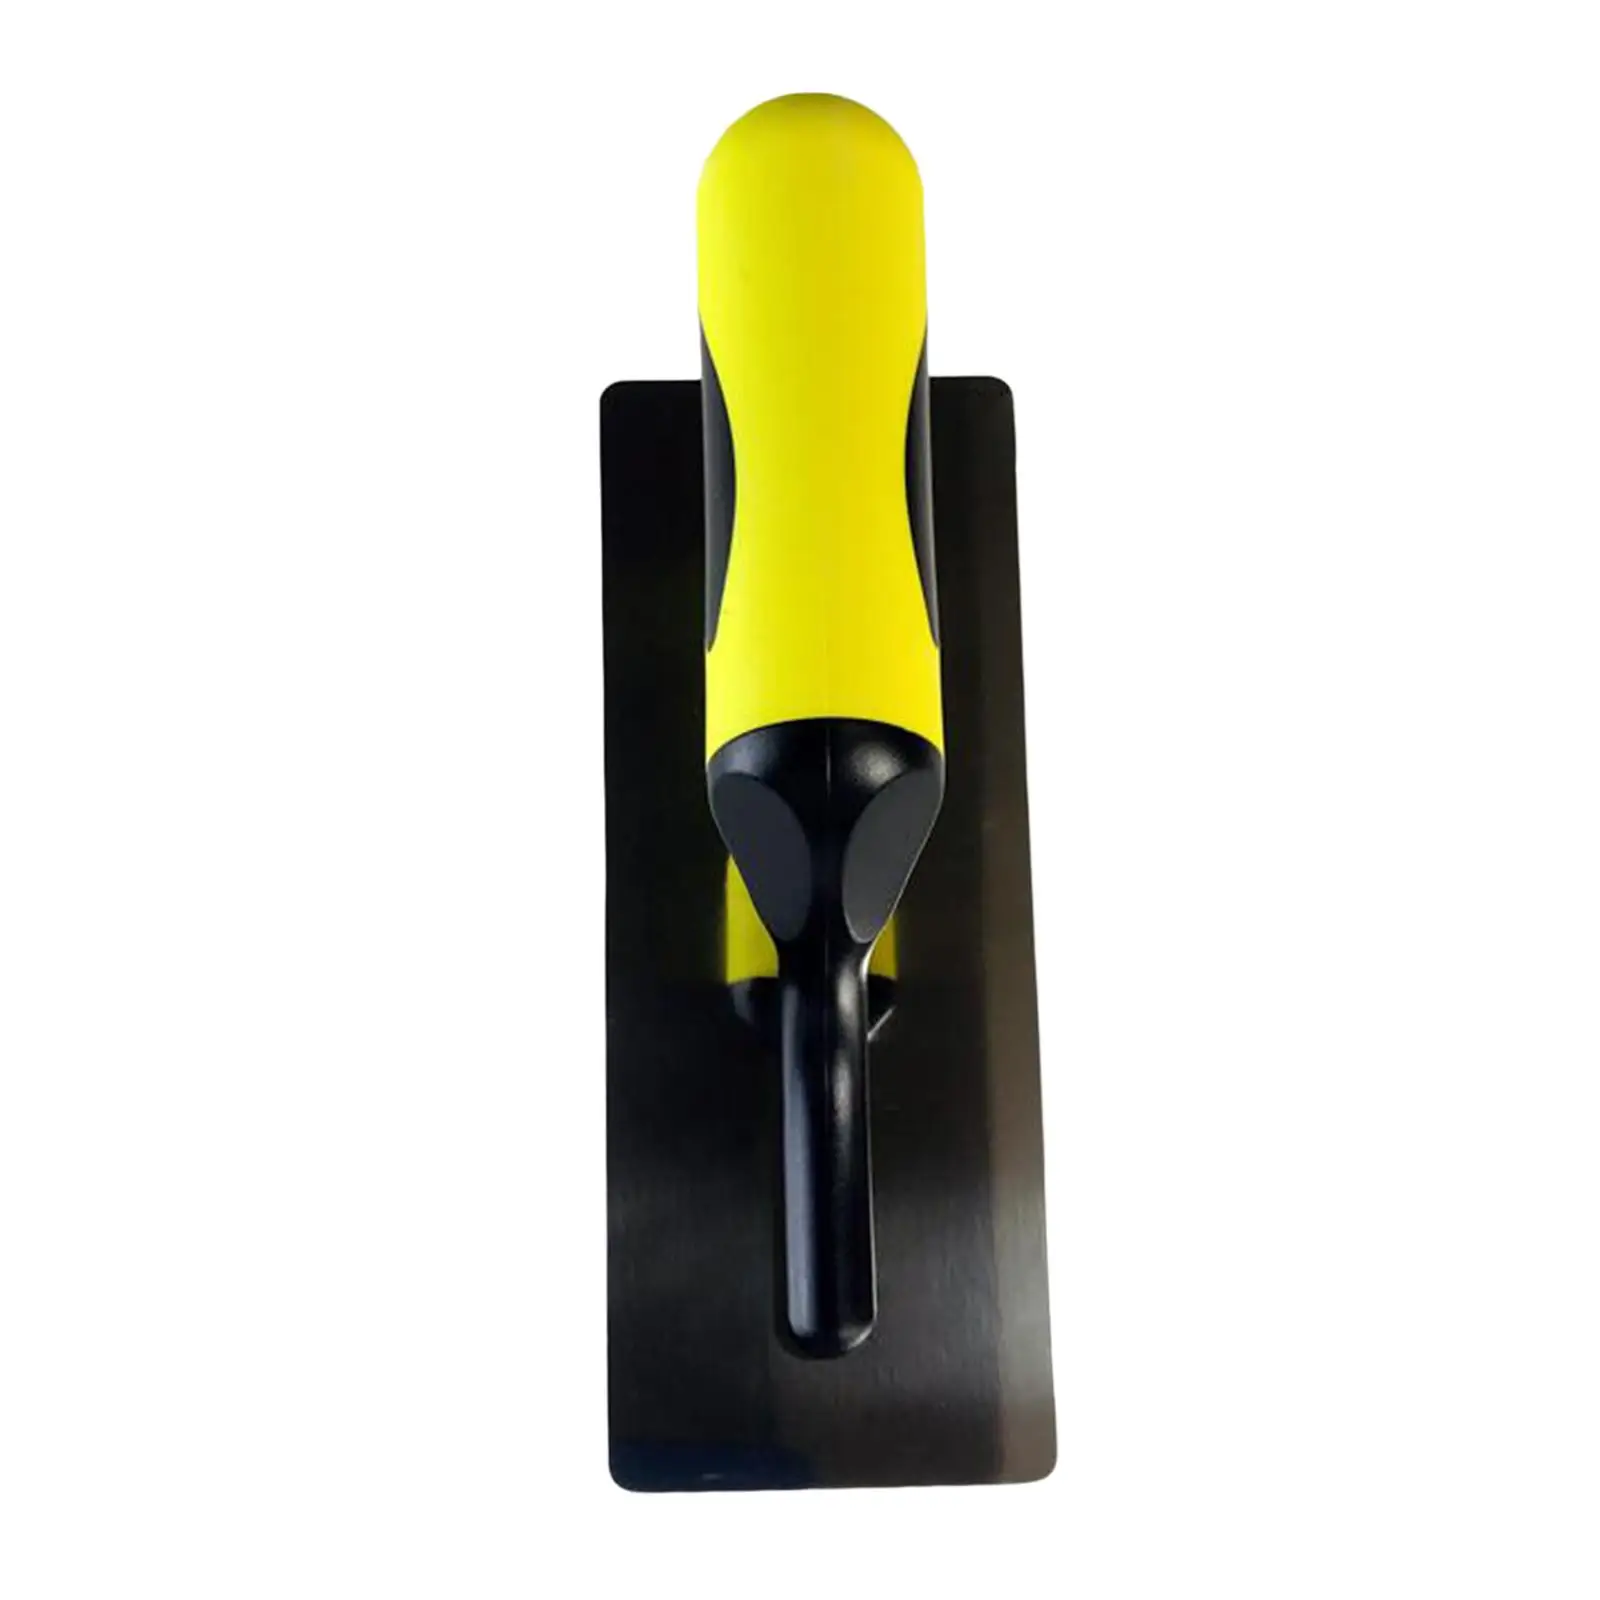 Finisher Plastering Trowel Sturdy Knife Scraper for Cement Repairing Drywall